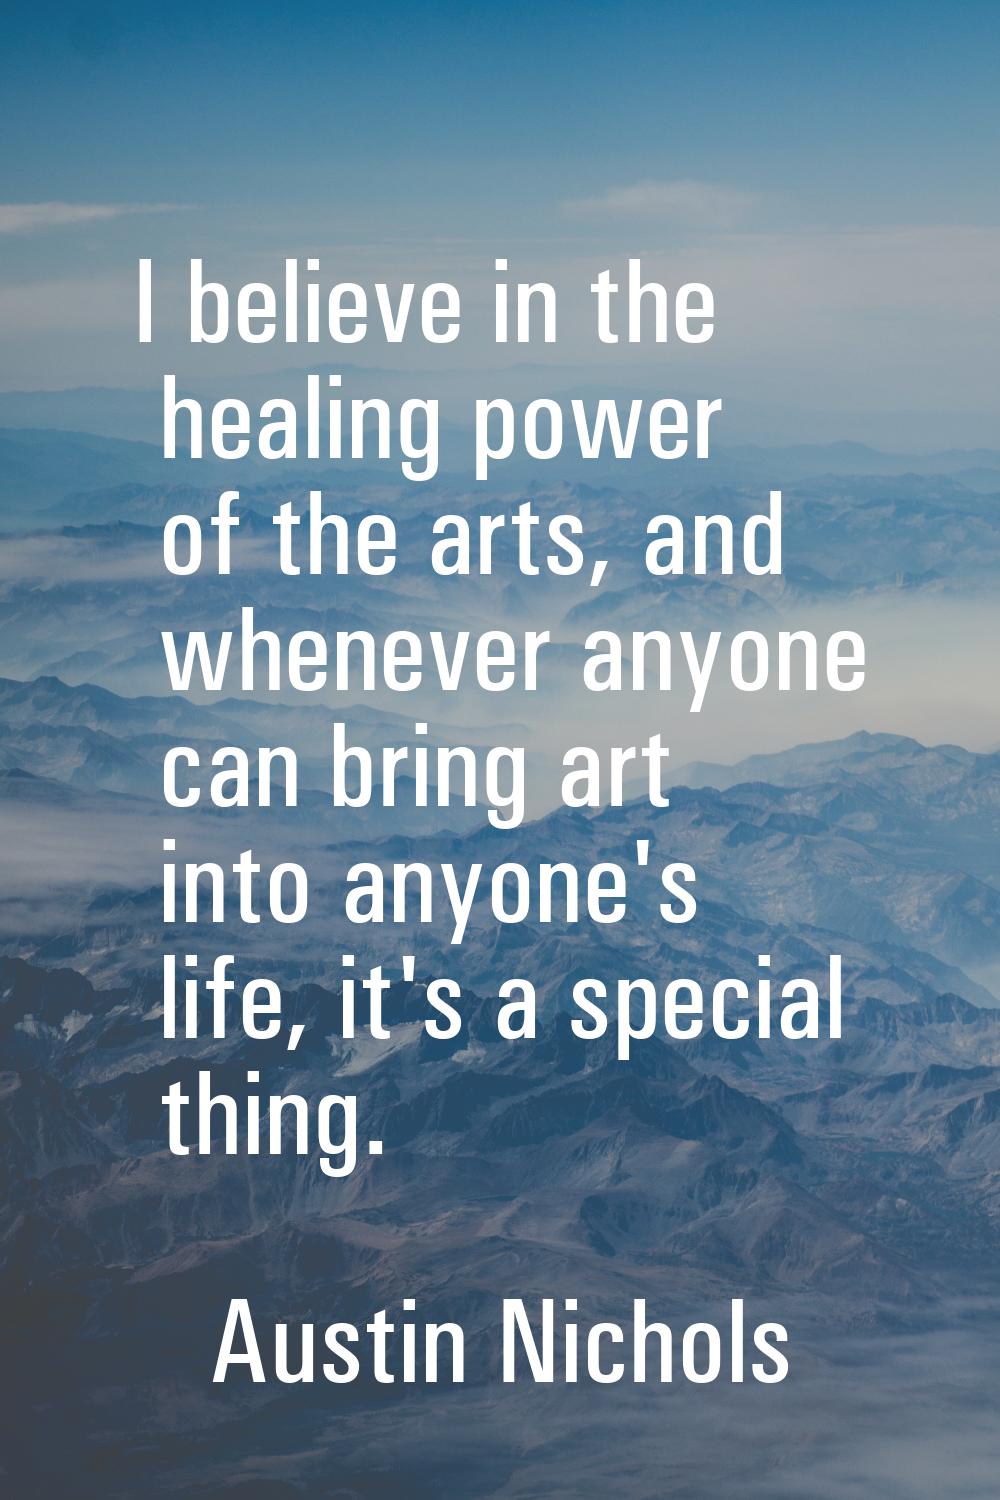 I believe in the healing power of the arts, and whenever anyone can bring art into anyone's life, i